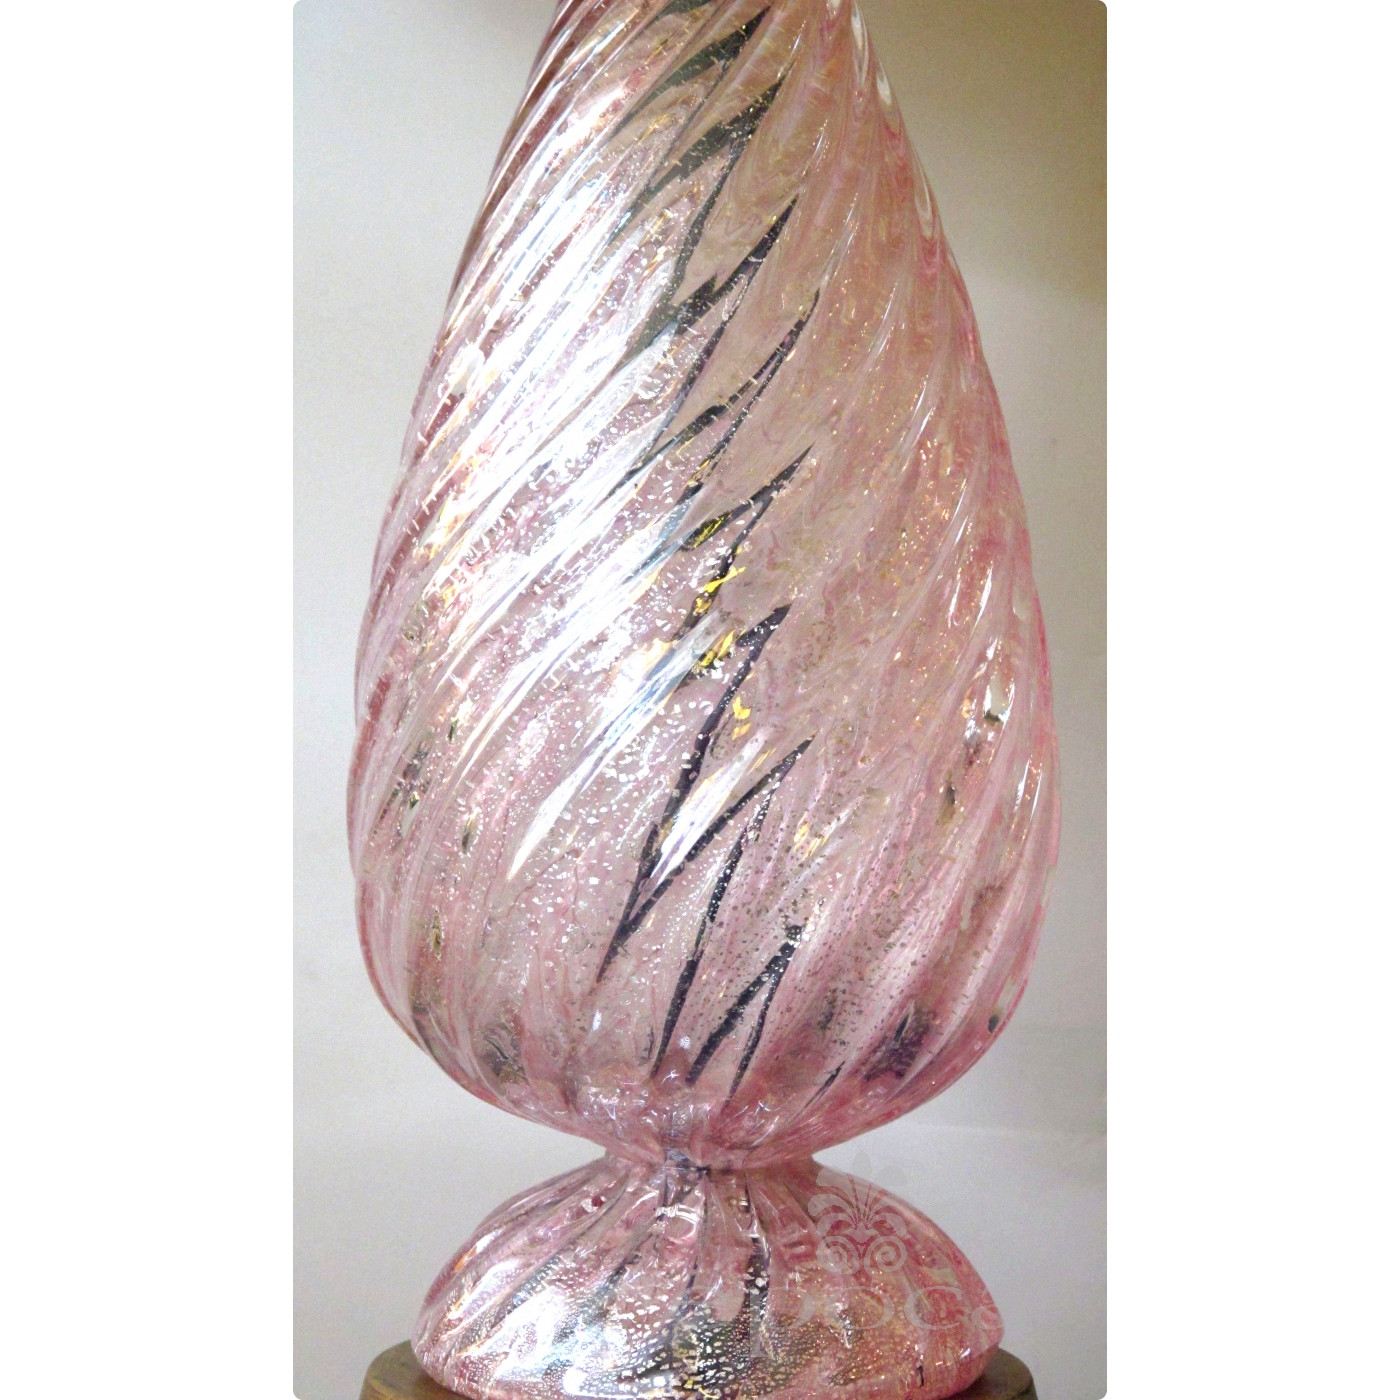 mid century ceramic vase teal table lamp of a shimmering murano mid century pink glass lamp with silver regarding a shimmering murano mid century pink glass lamp with silver inclusions